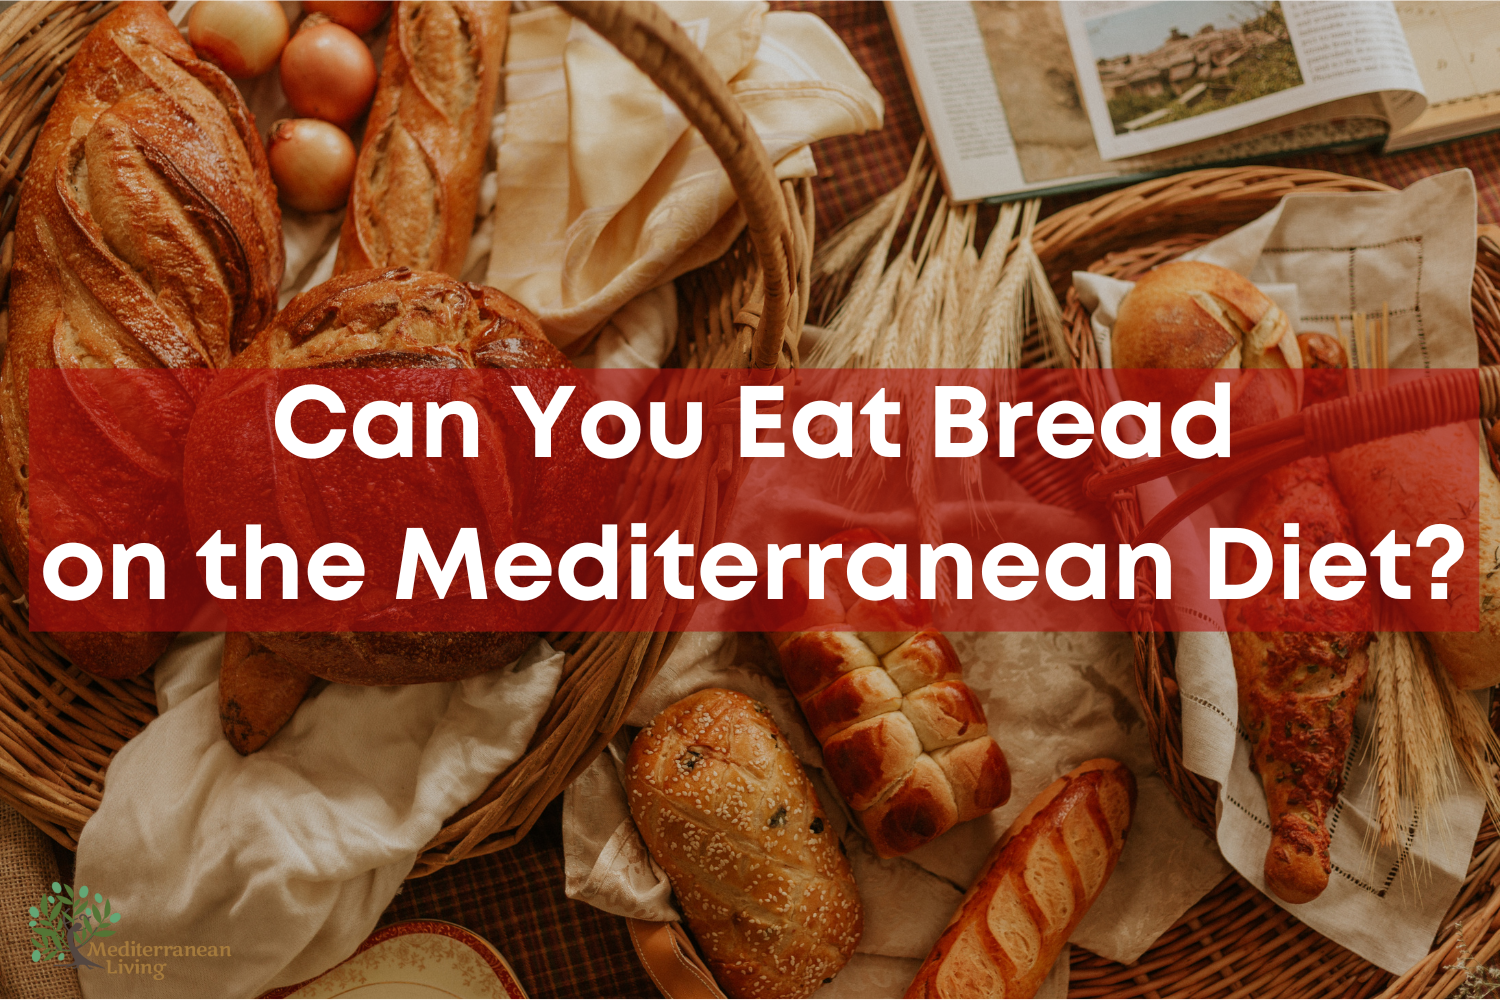 Can You Eat Bread on the Mediterranean Diet